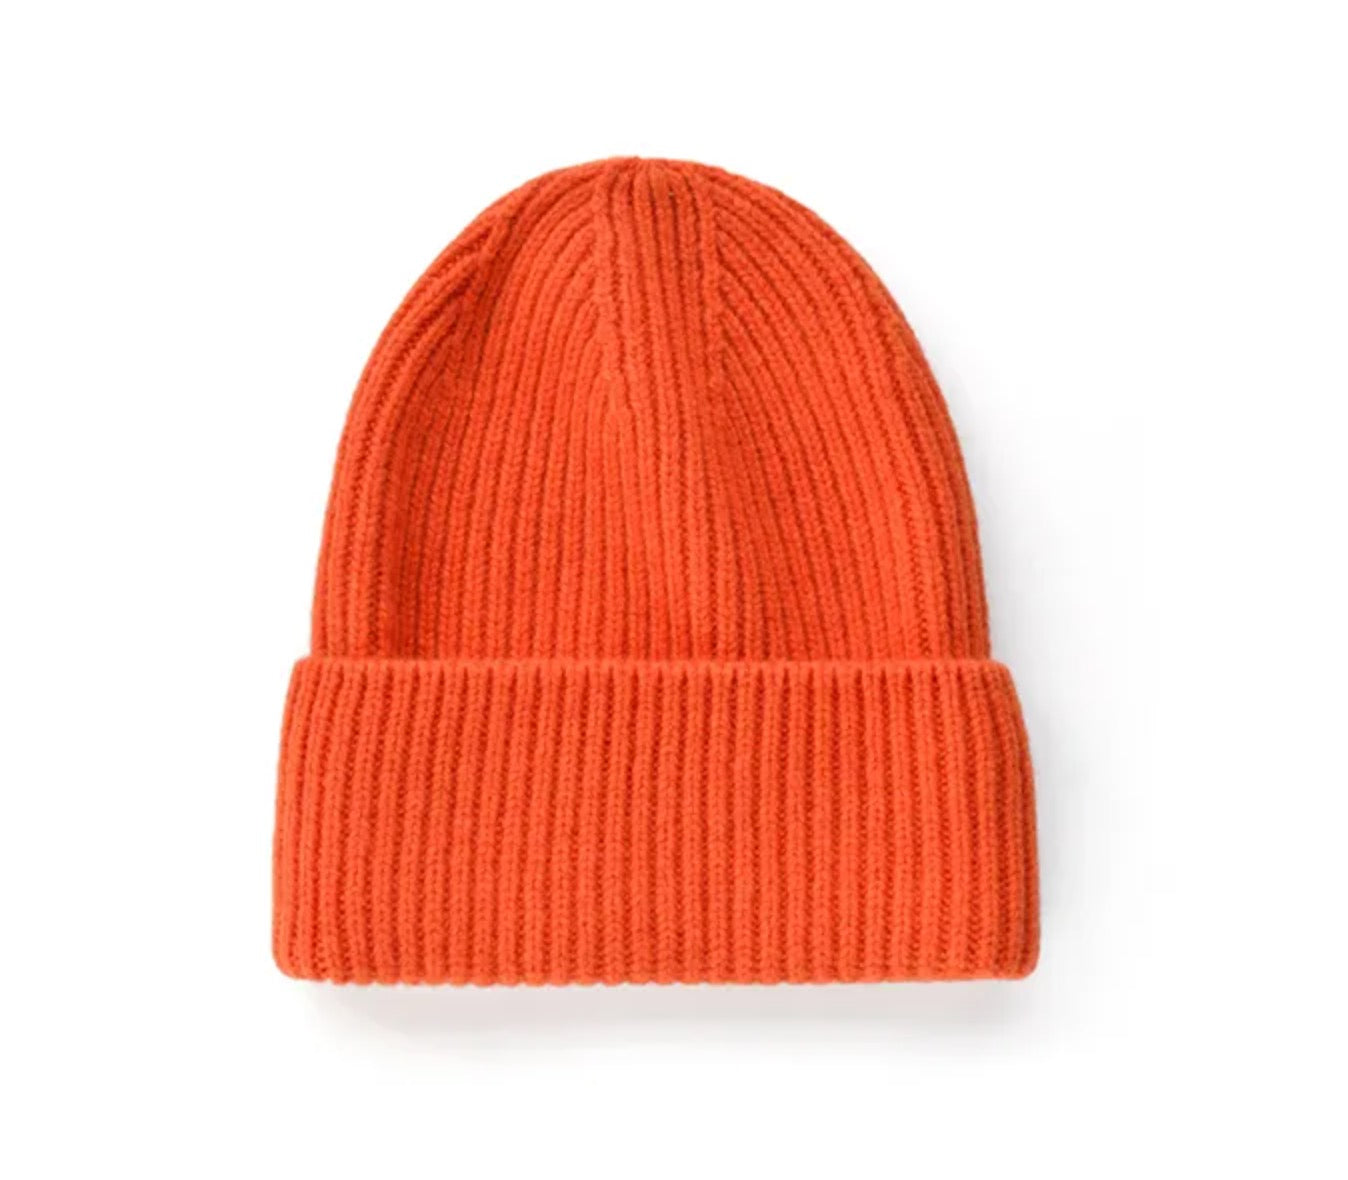 Merino wool beanie hat with fold over hem | 10 colors